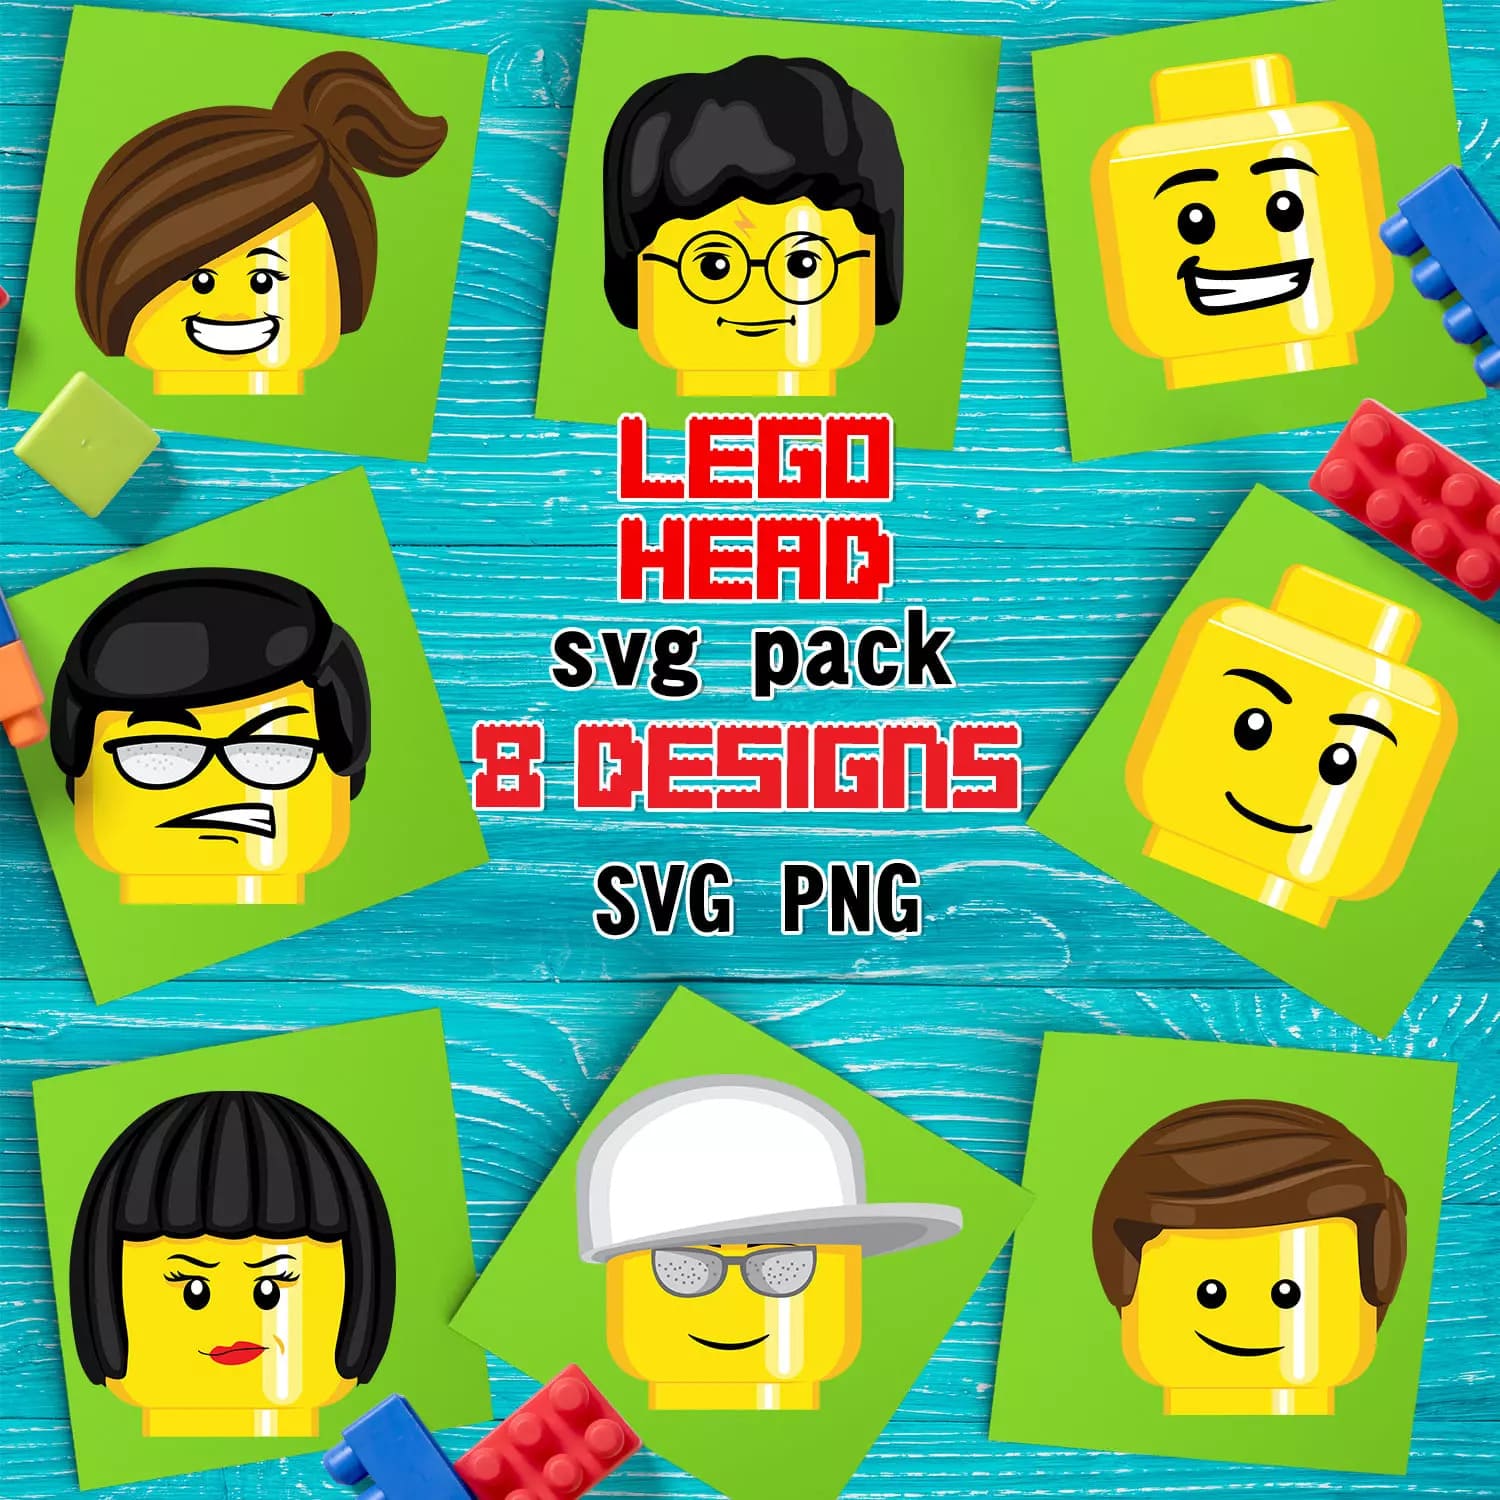 Lego Head SVG Preview.